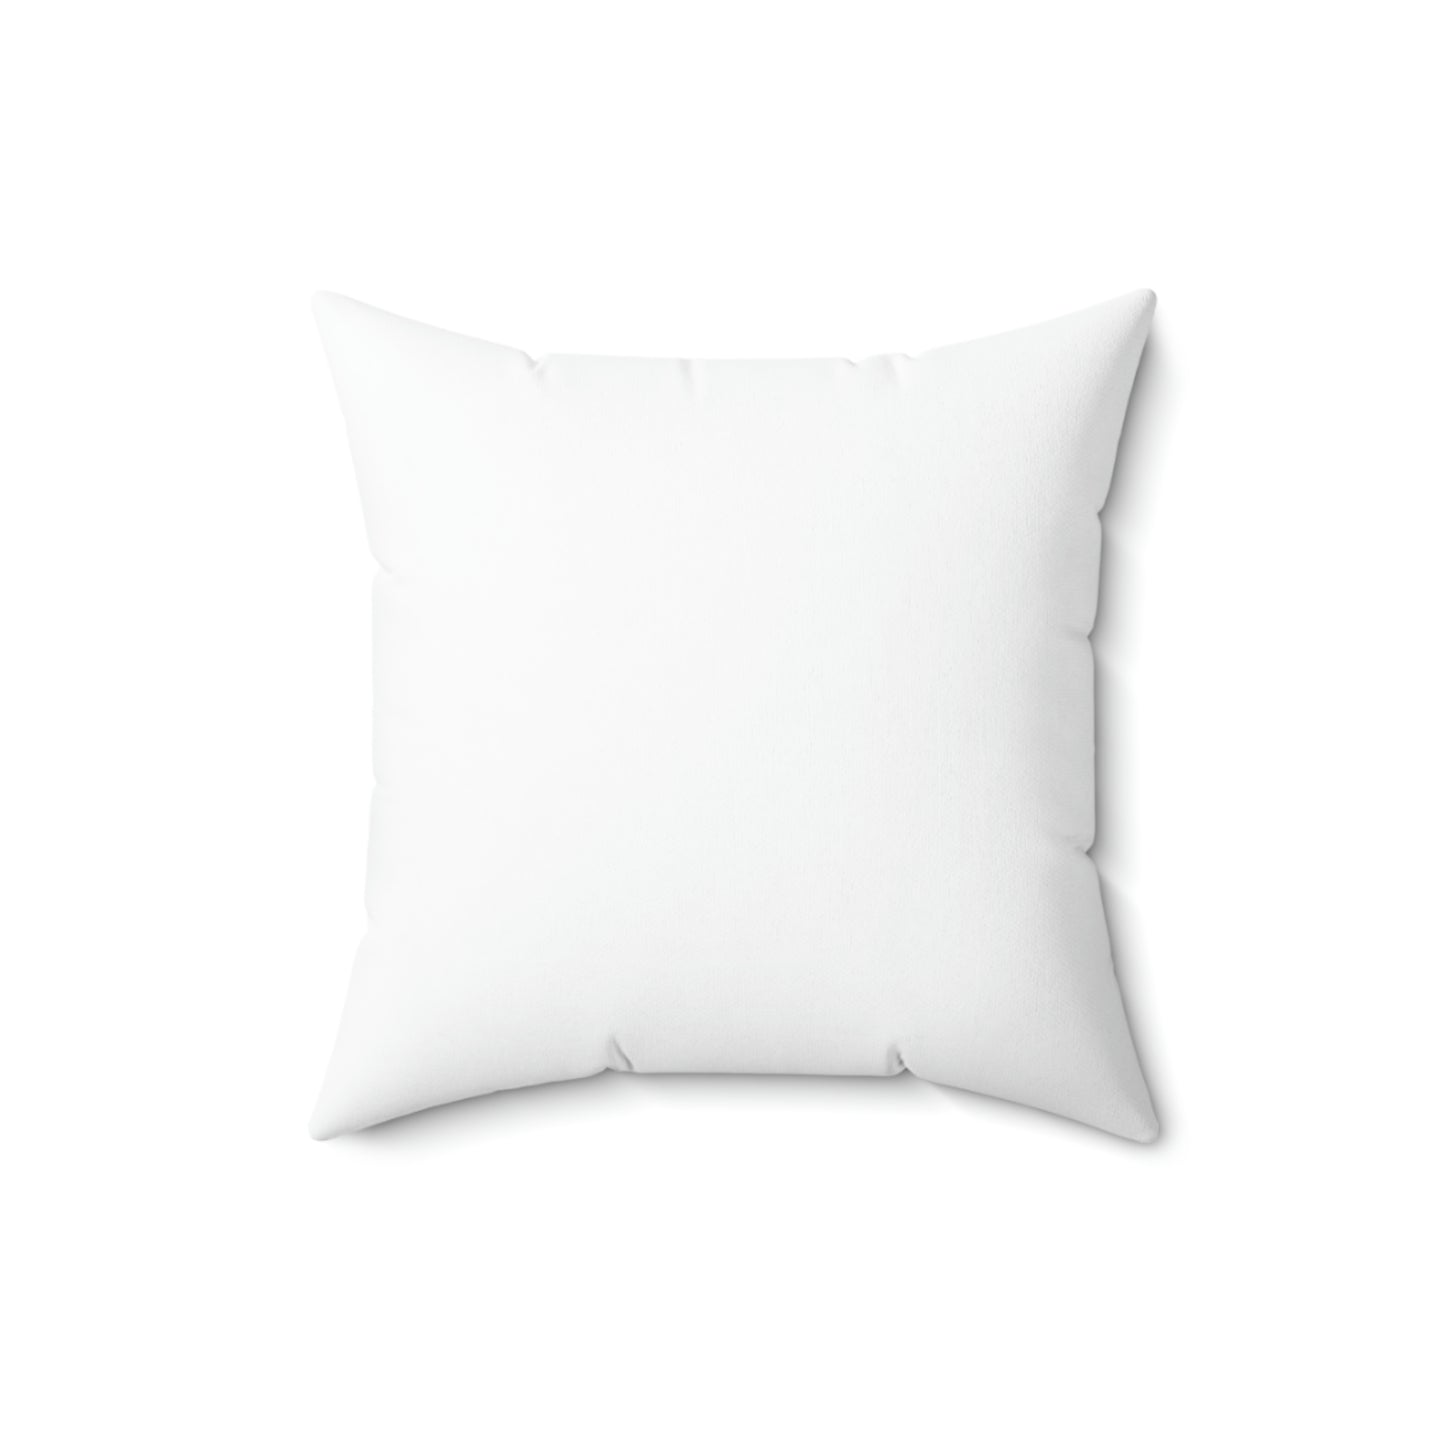 Wine Country Pillow